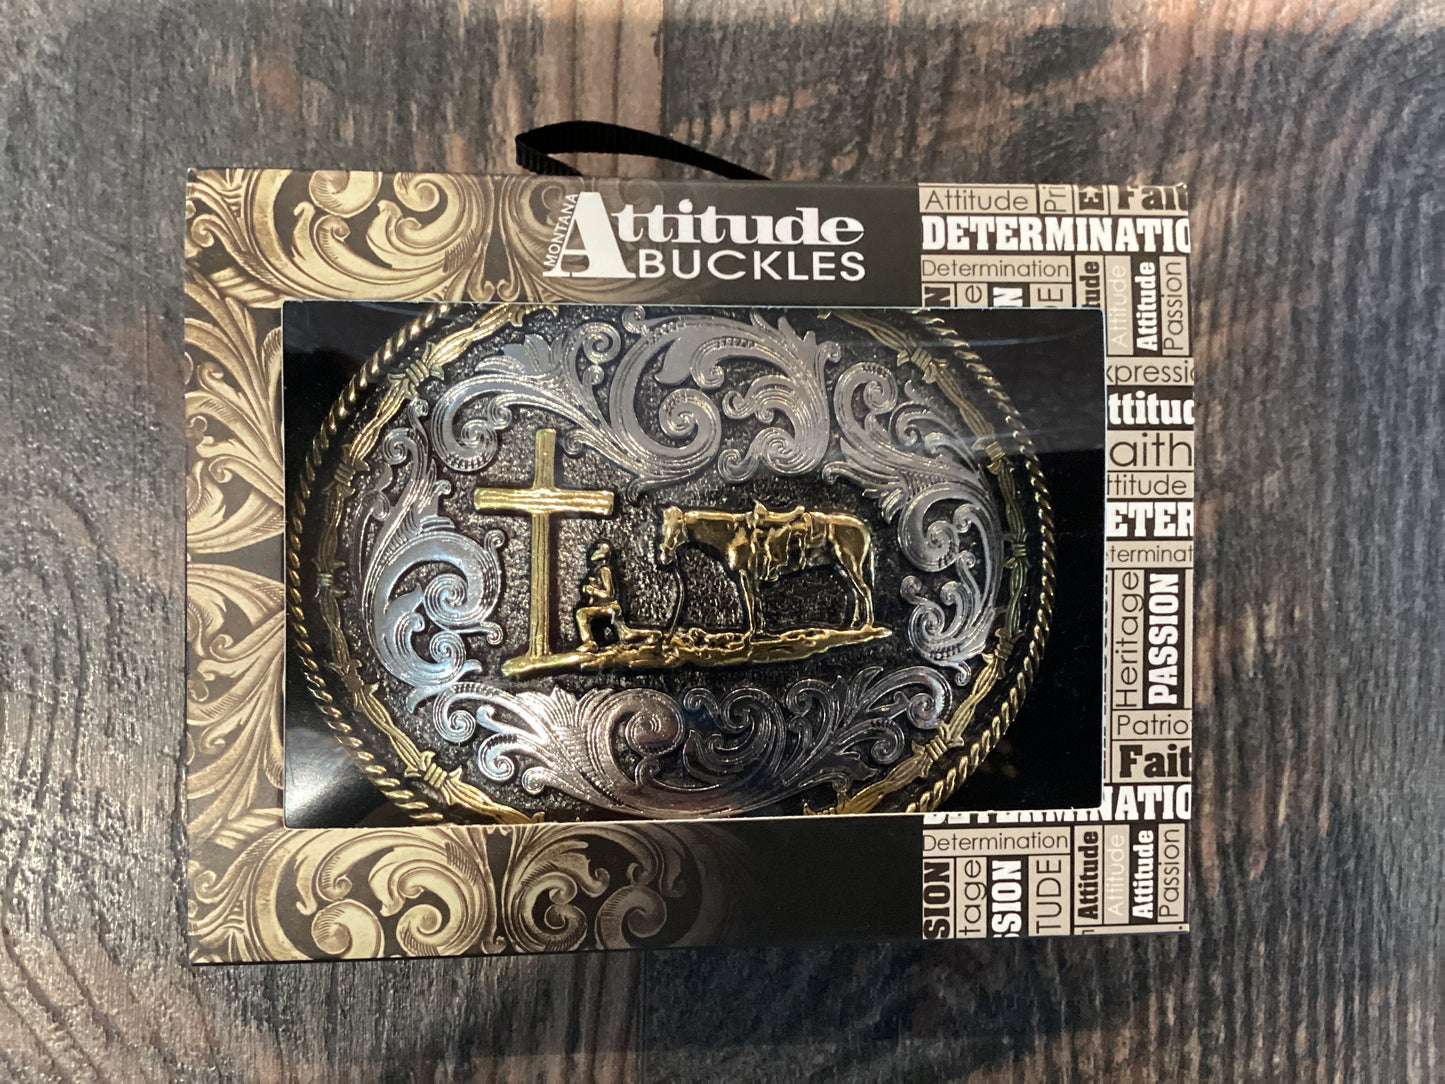 Cowboy and Cross Buckle